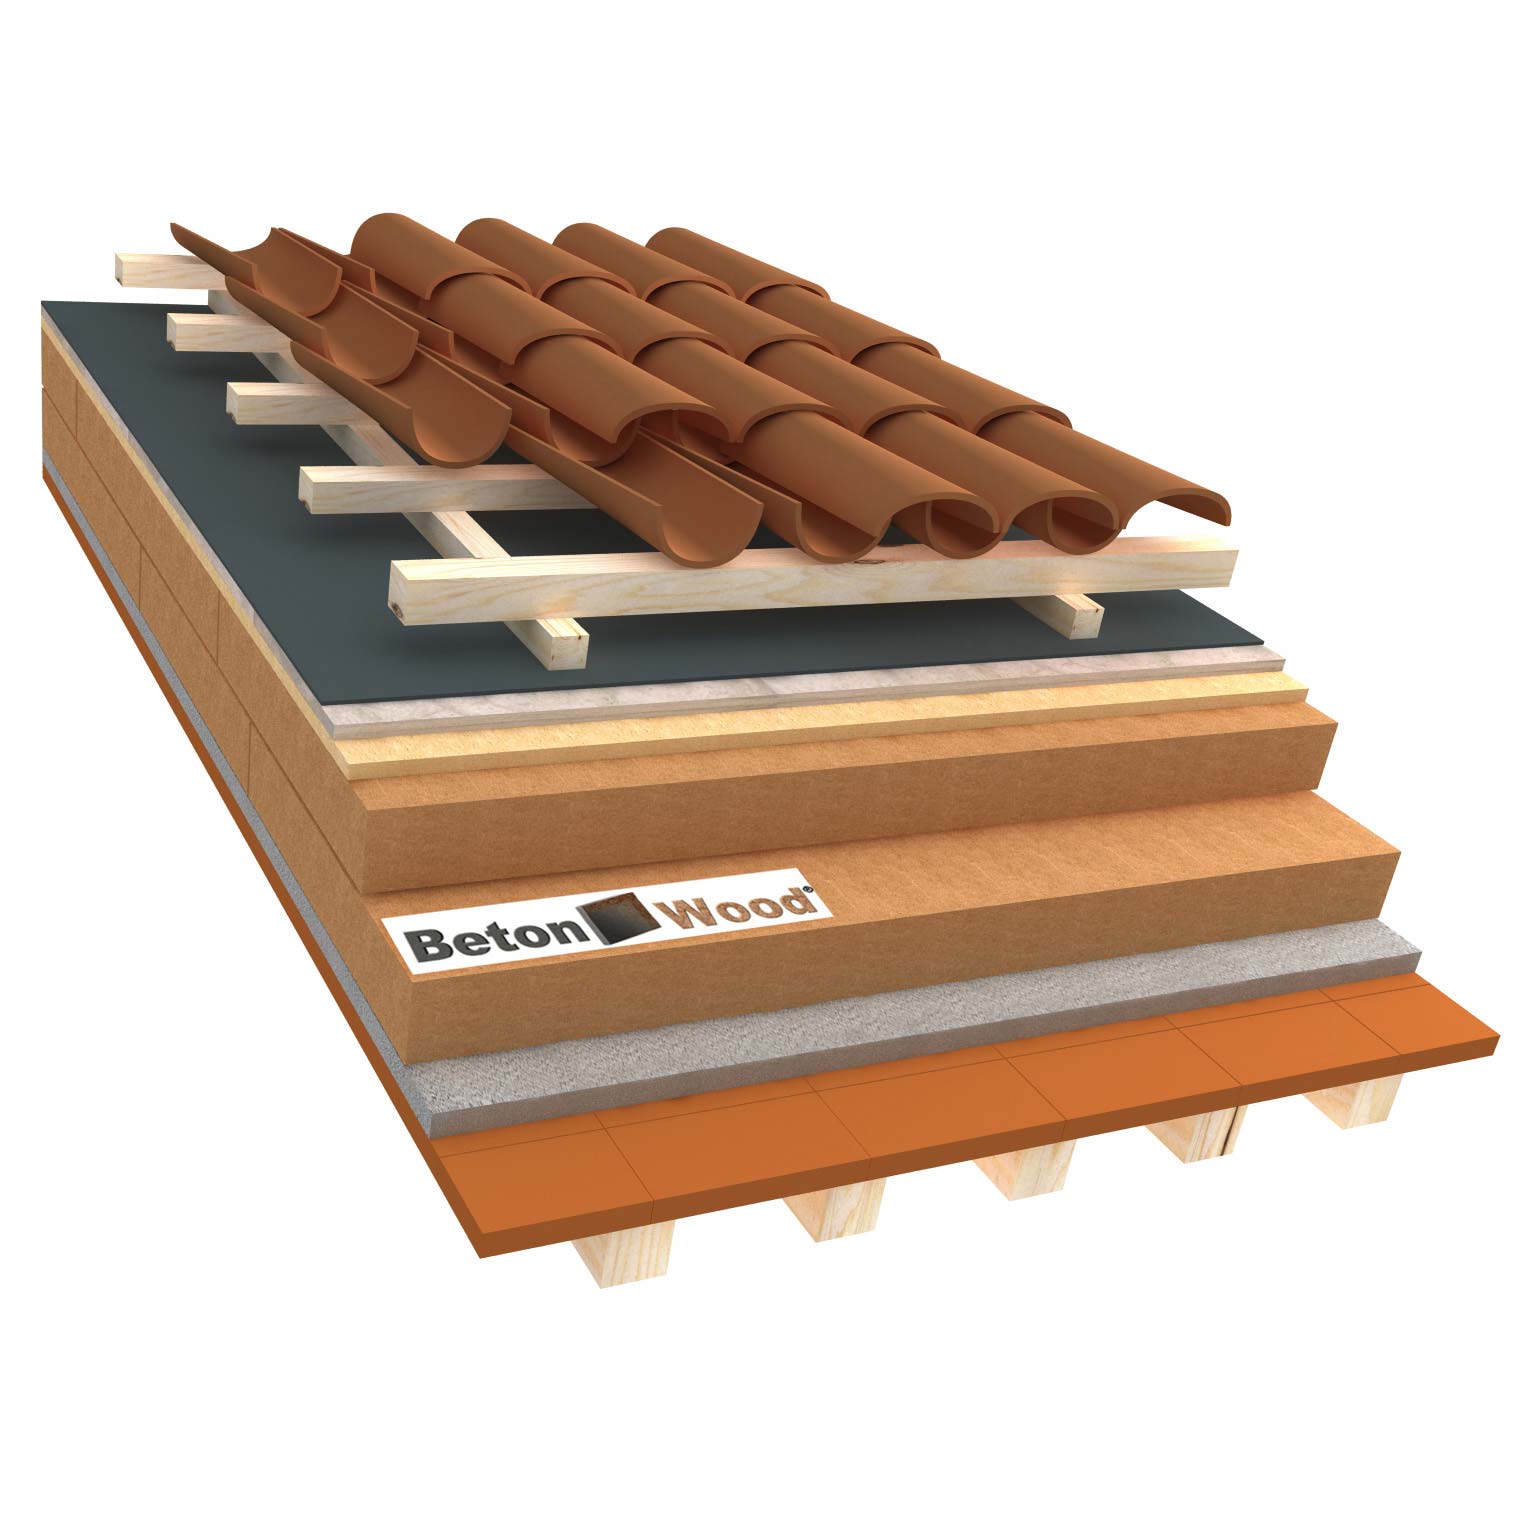 Ventilated roof with fiber wood Isorel, Therm SD and cement bonded particle boards on terracotta tiles